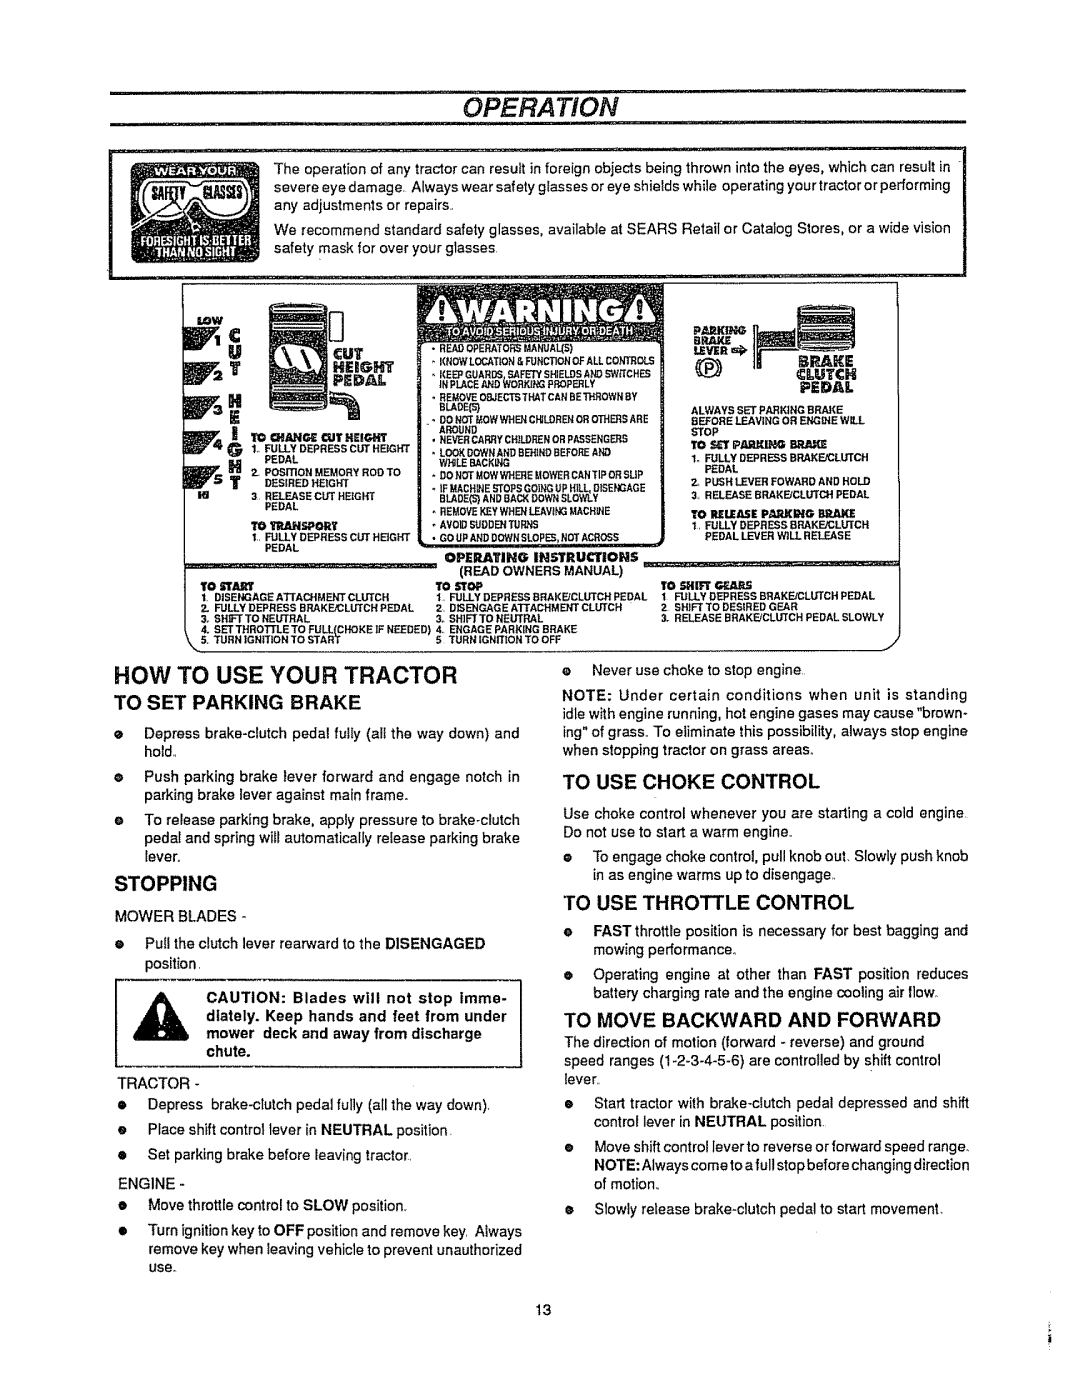 Sears 536.25587 Operation, How To Use Your Tractor, THEmG_, Stopping, To Use Throttle Control, To Set Parking Brake 